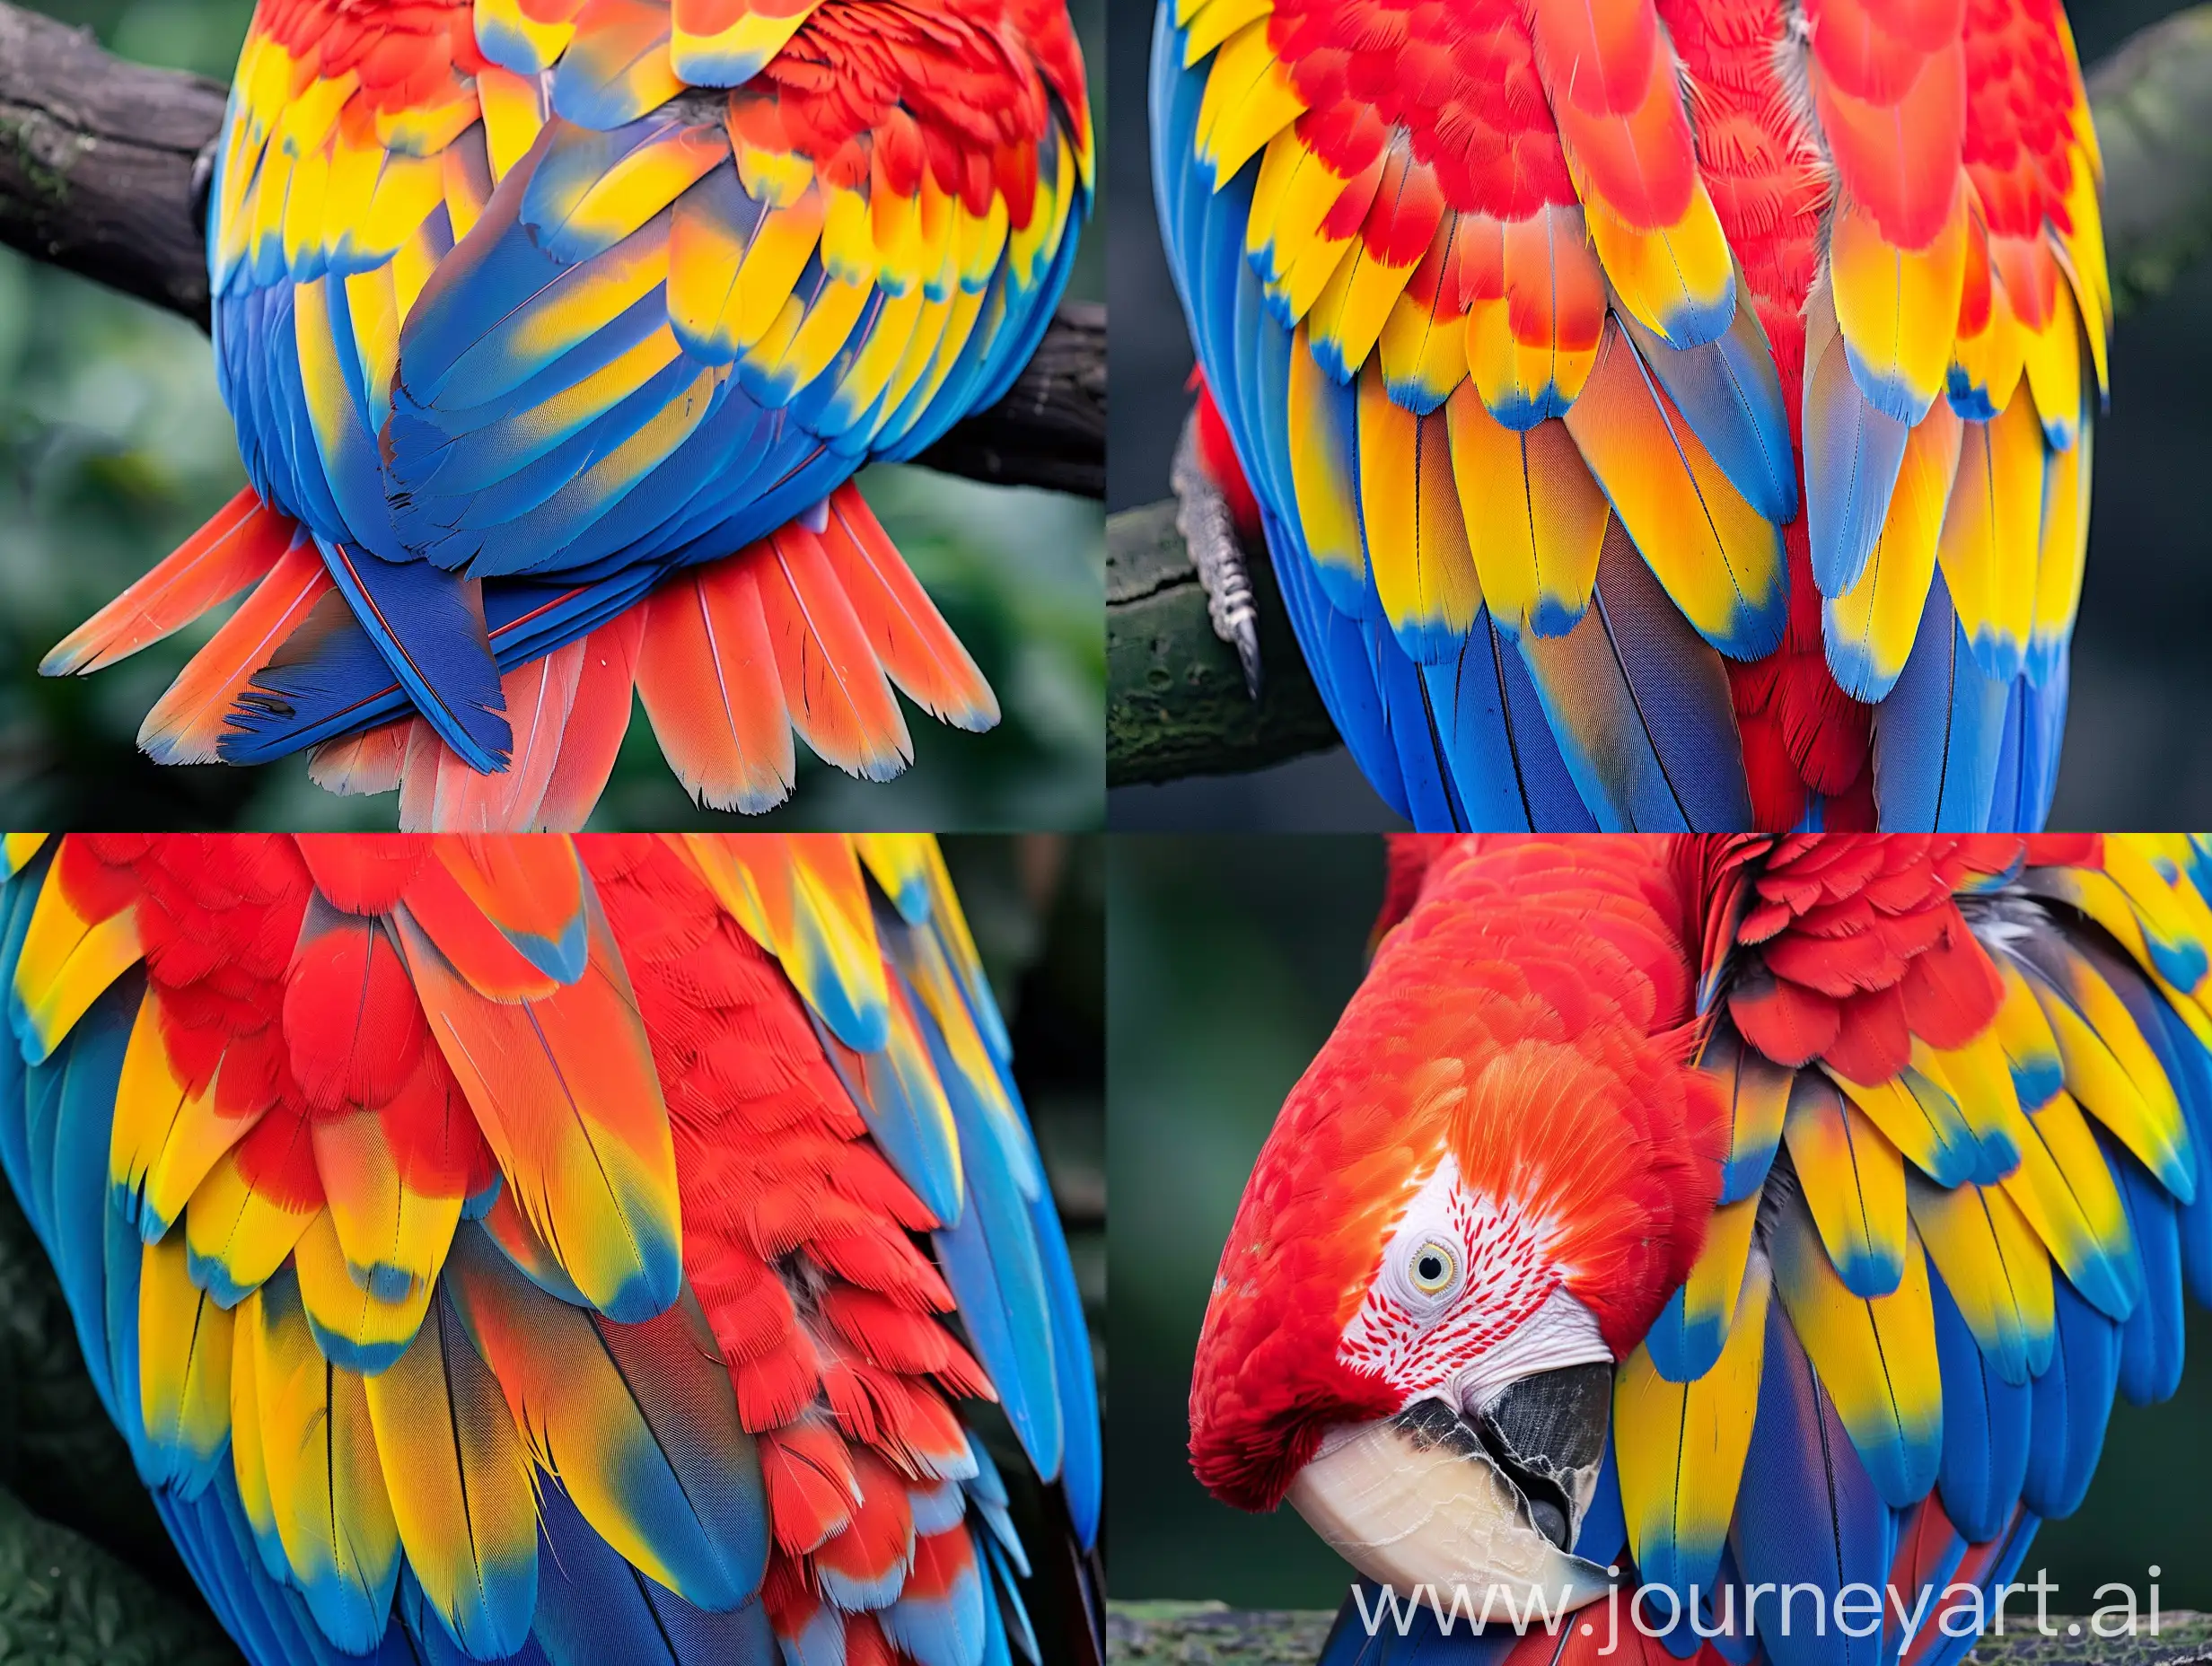 Vibrant-Scarlet-Macaw-Feathers-in-Exotic-Nature-Setting